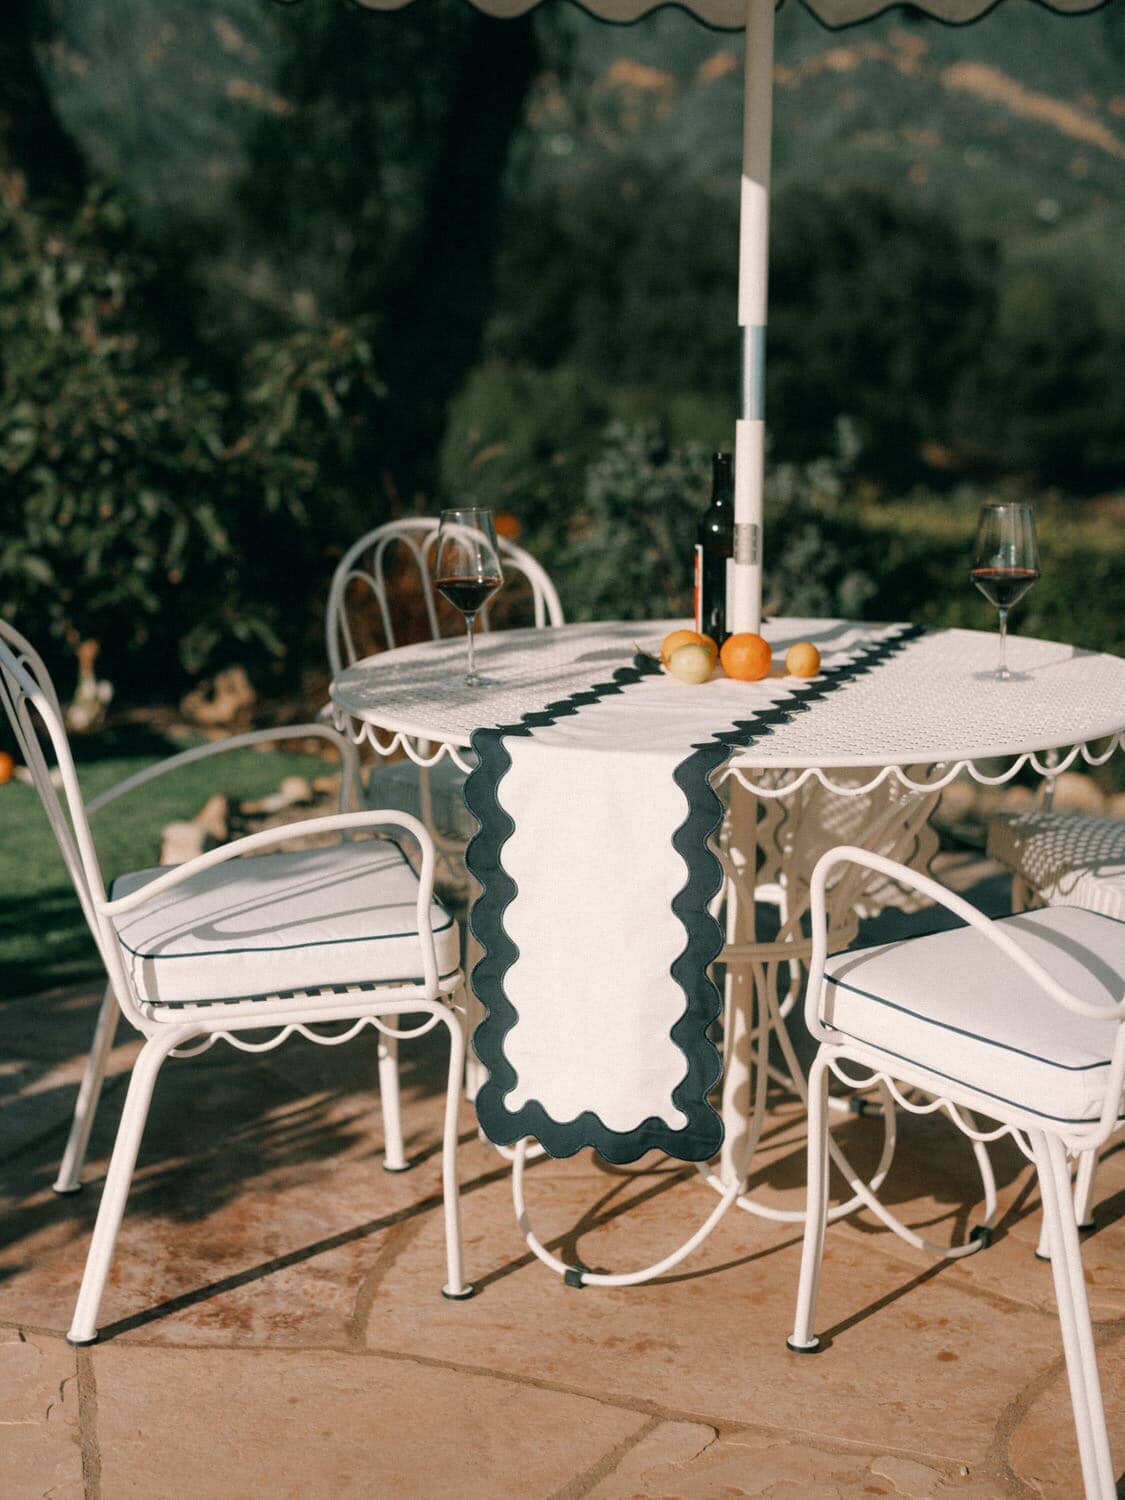 al fresco dining table, chairs on a patio